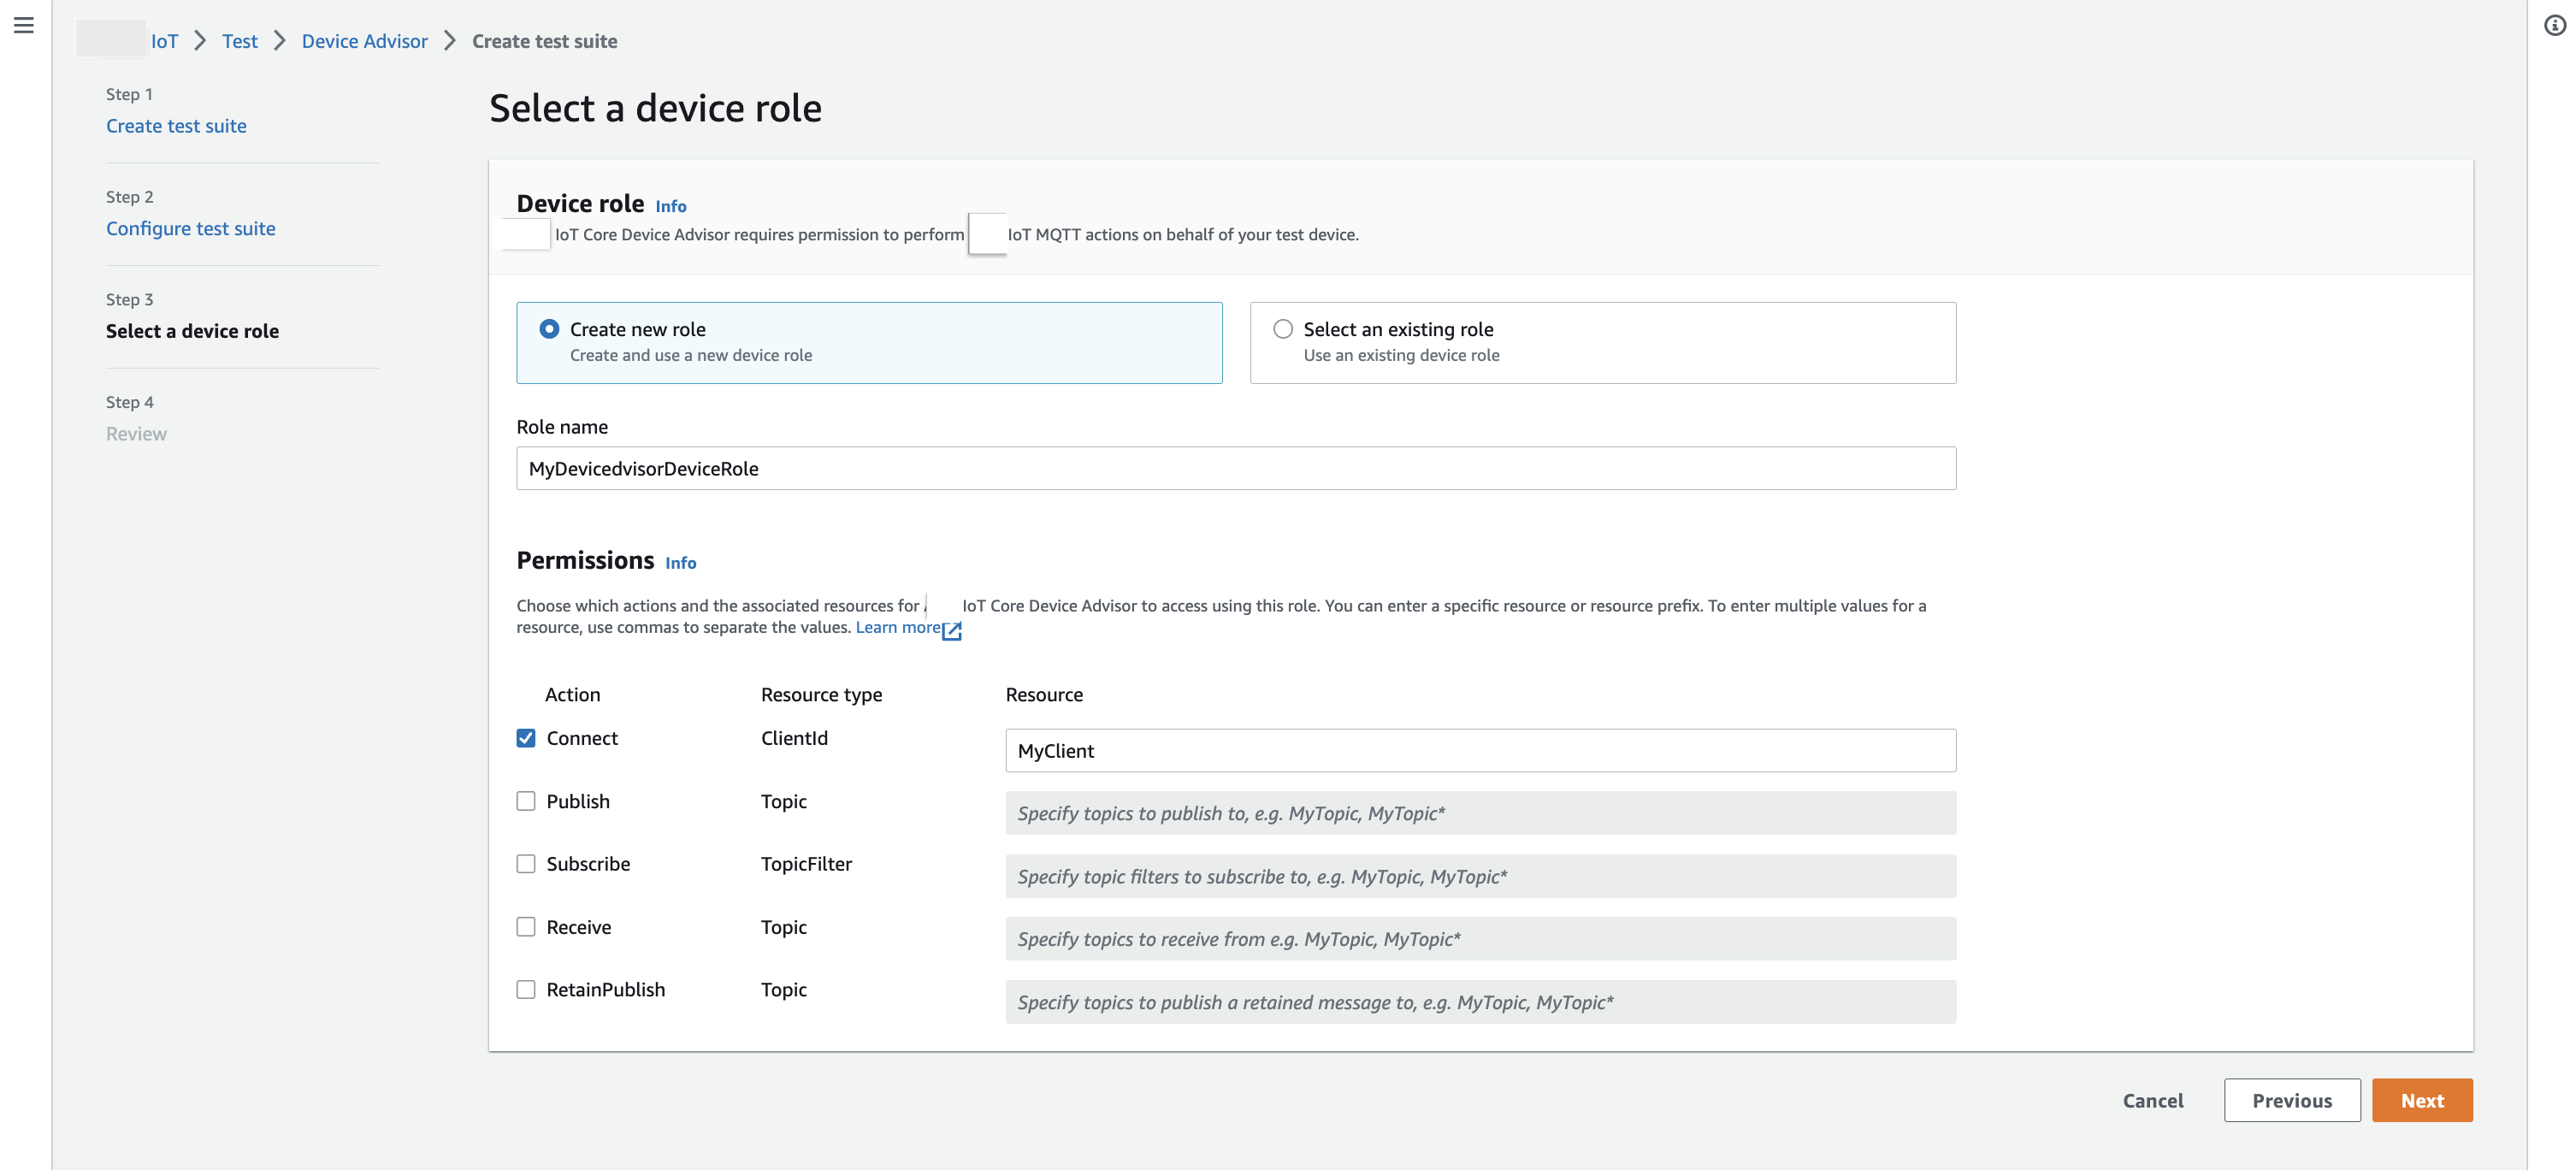 
                            The "Select a device role" step in Device Advisor for creating a test suite, 
                                with options to create a new role or select an existing role, and fields to 
                                specify role name, permissions, and resource details.